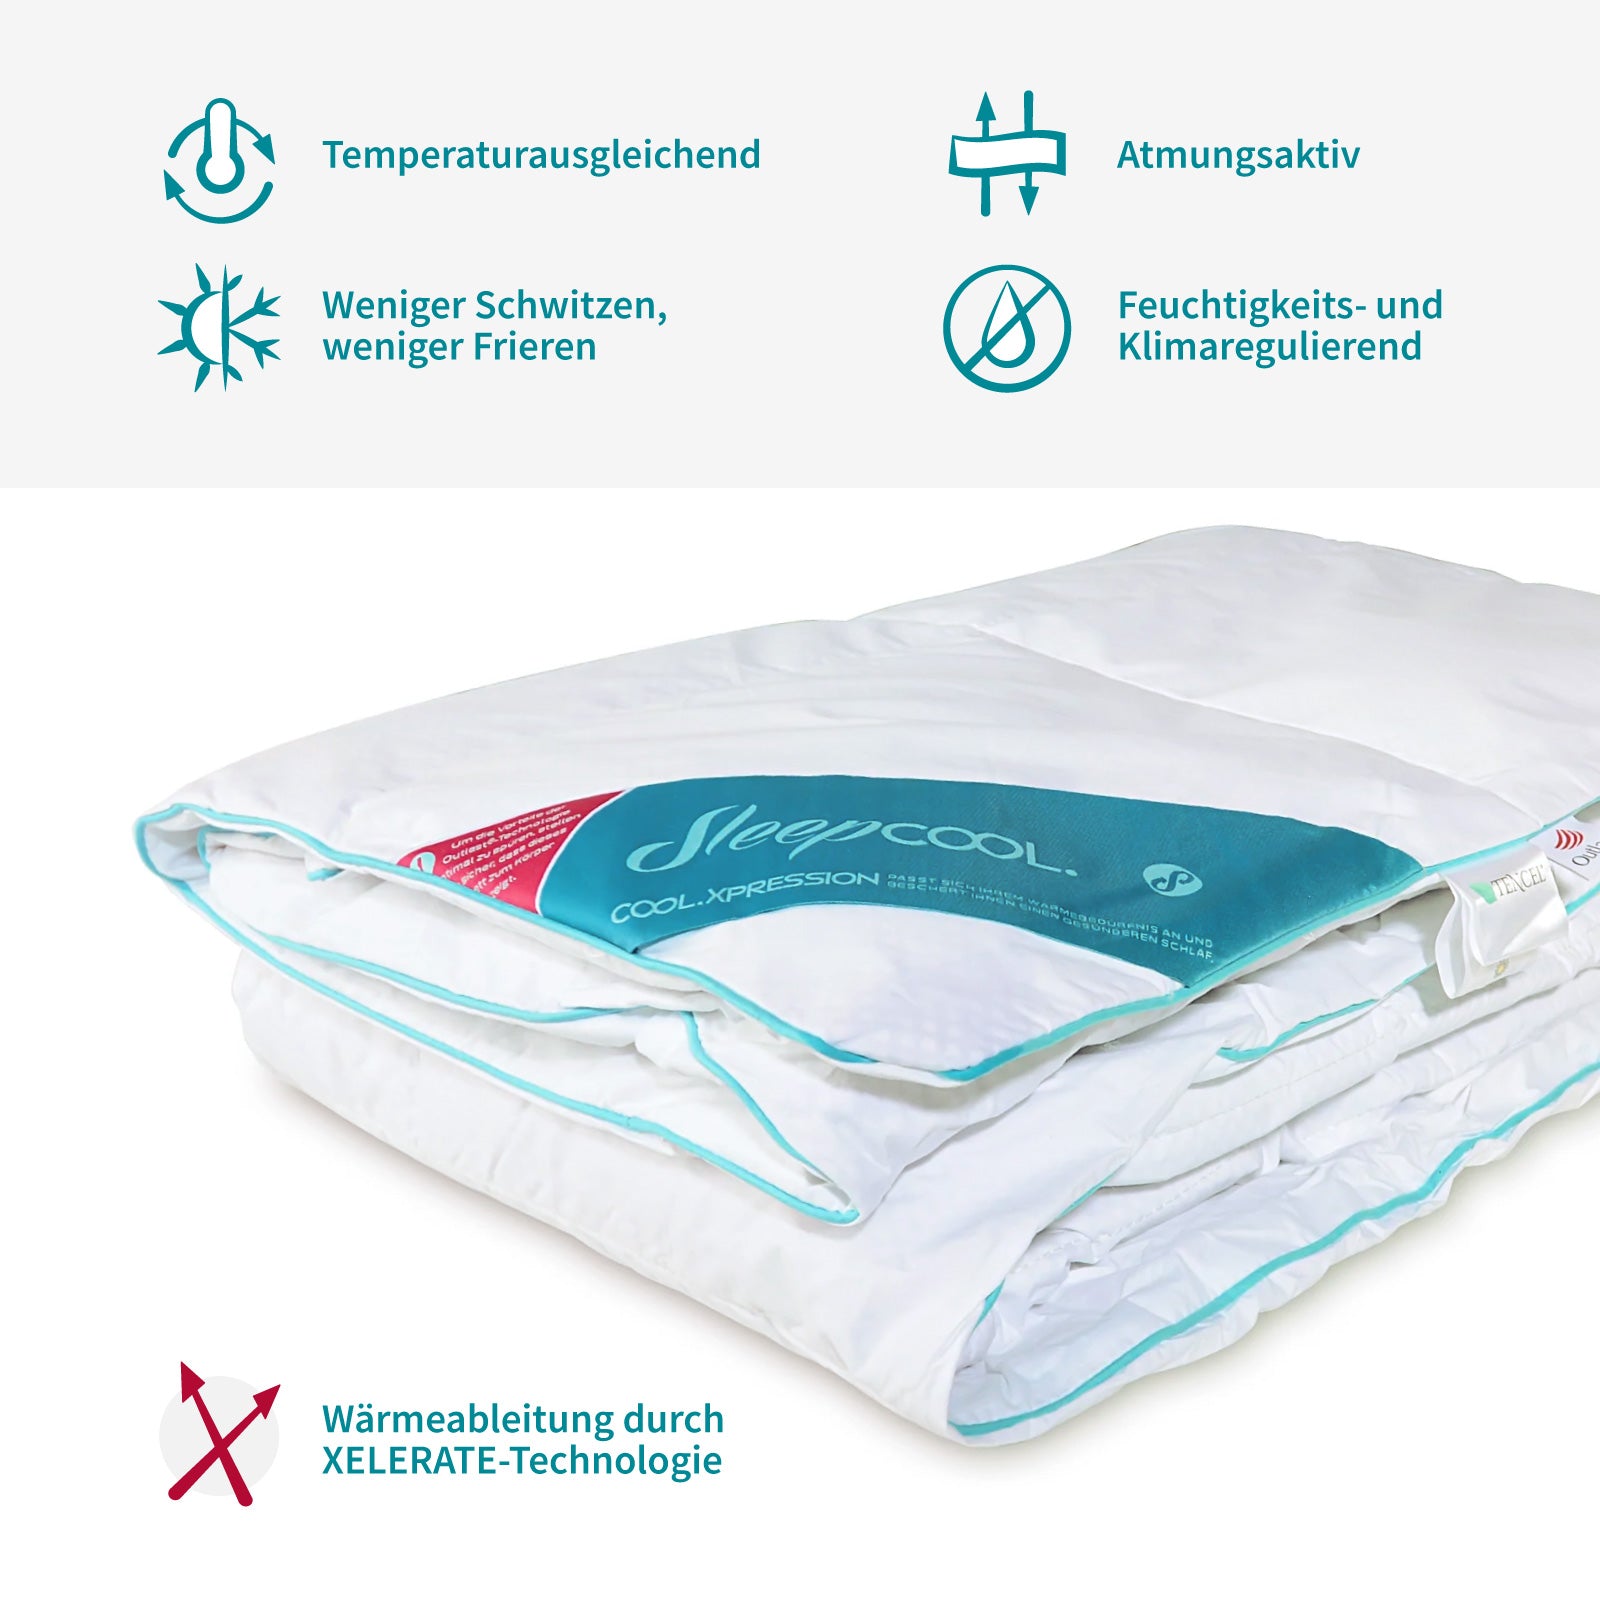 Temperature-regulating Duvet (400g-490g) COOL.XPRESSION-Light, breathable quilt cover-Not too warm, not too cold